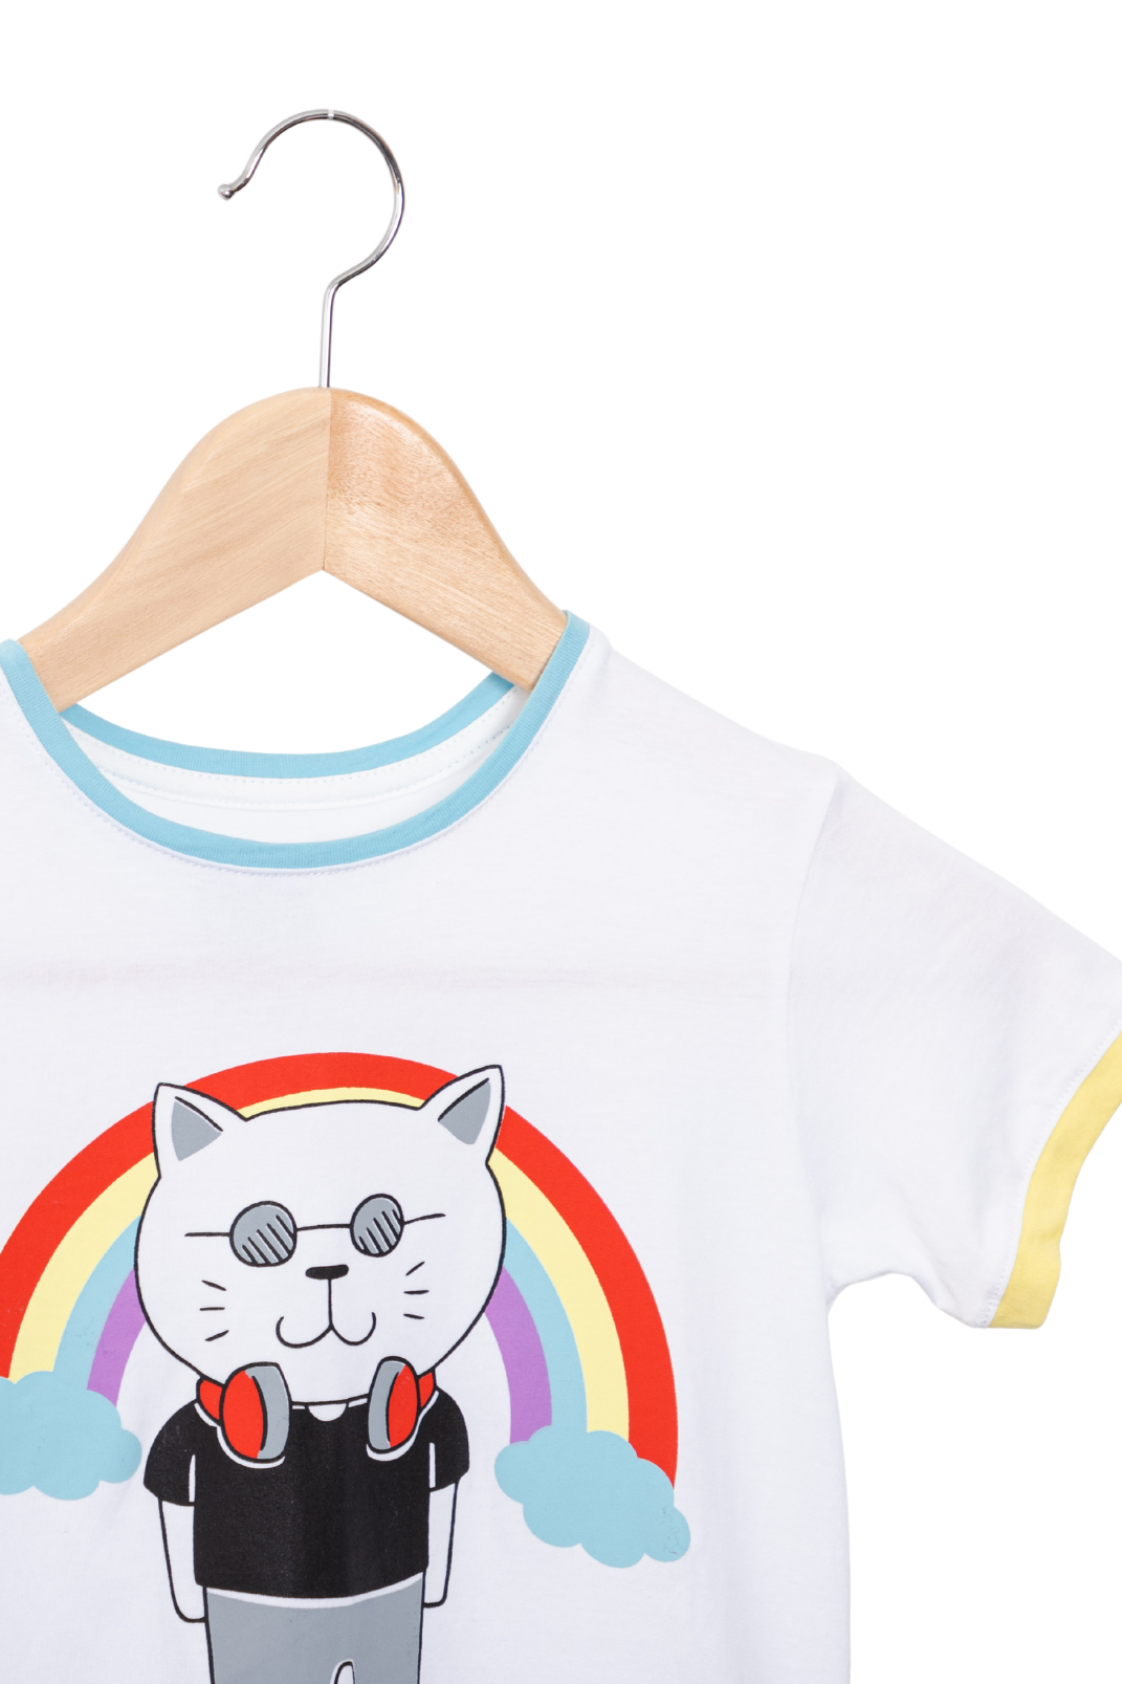 White T-Shirt, made in Peruvian Pima cotton with a Cat and rainbow print - Non-stereotypes design by Prisma Kiddos